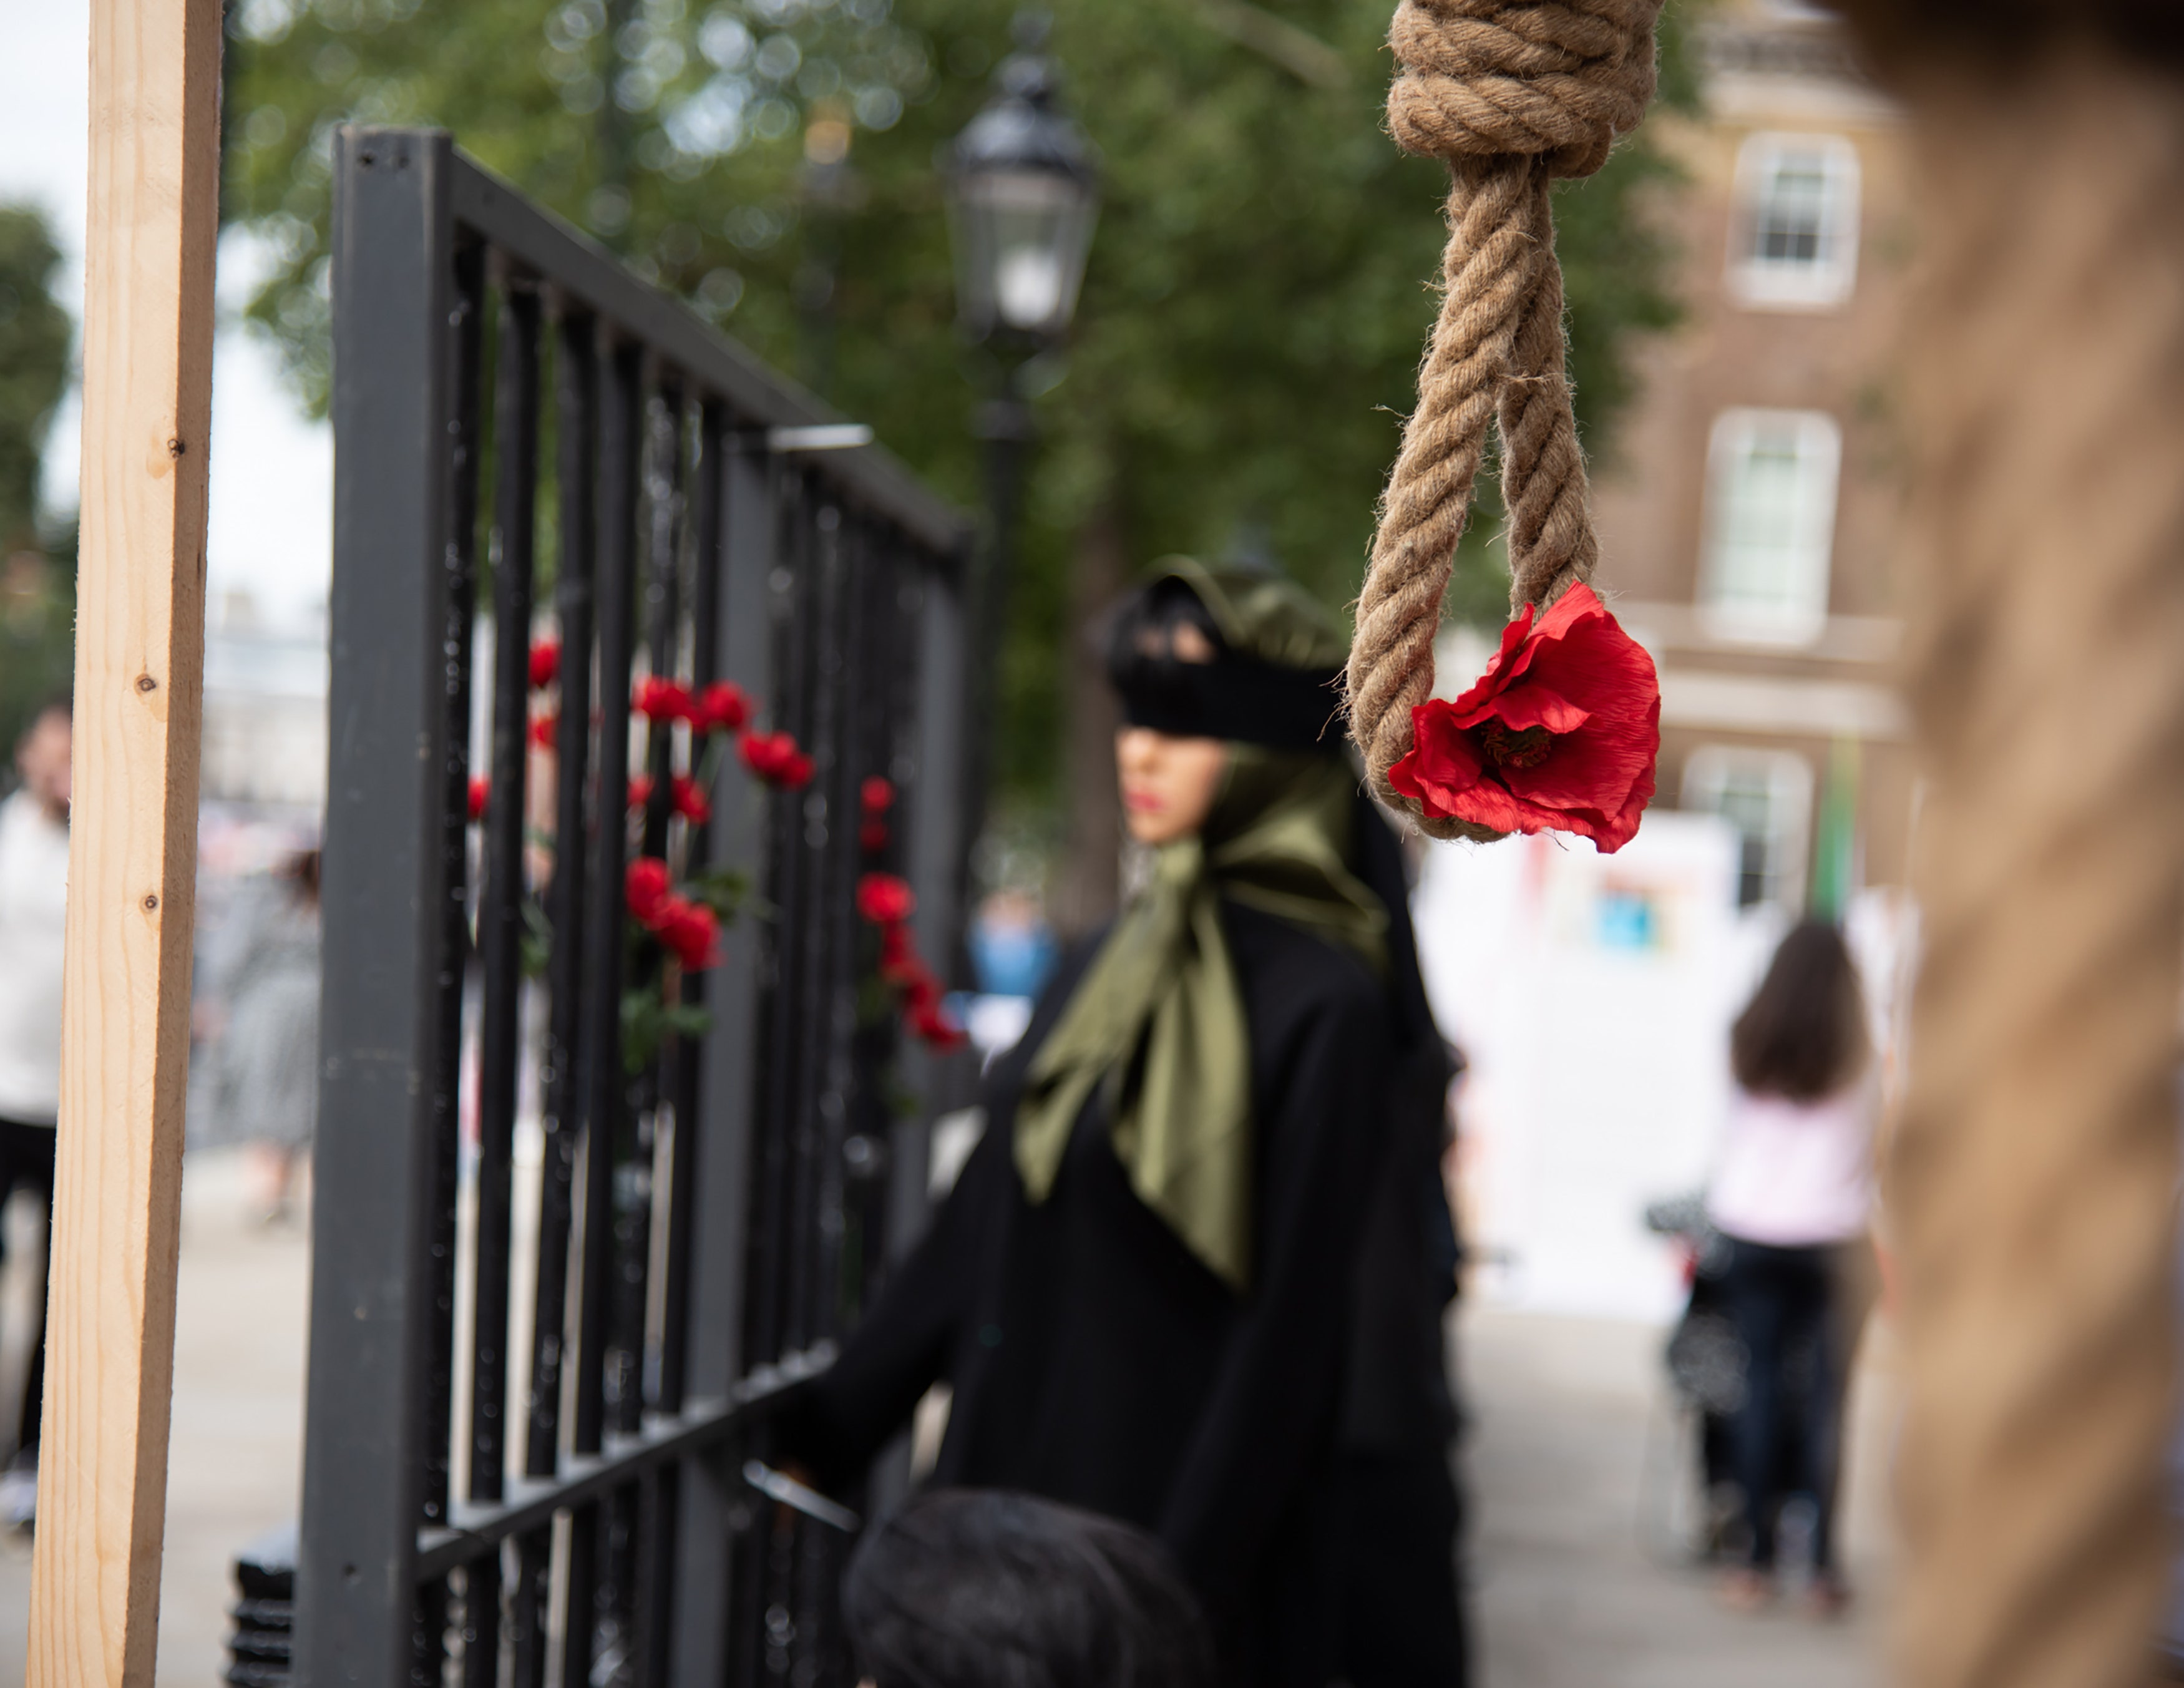 Iran executes first protester since nationwide women's rights demonstrations began